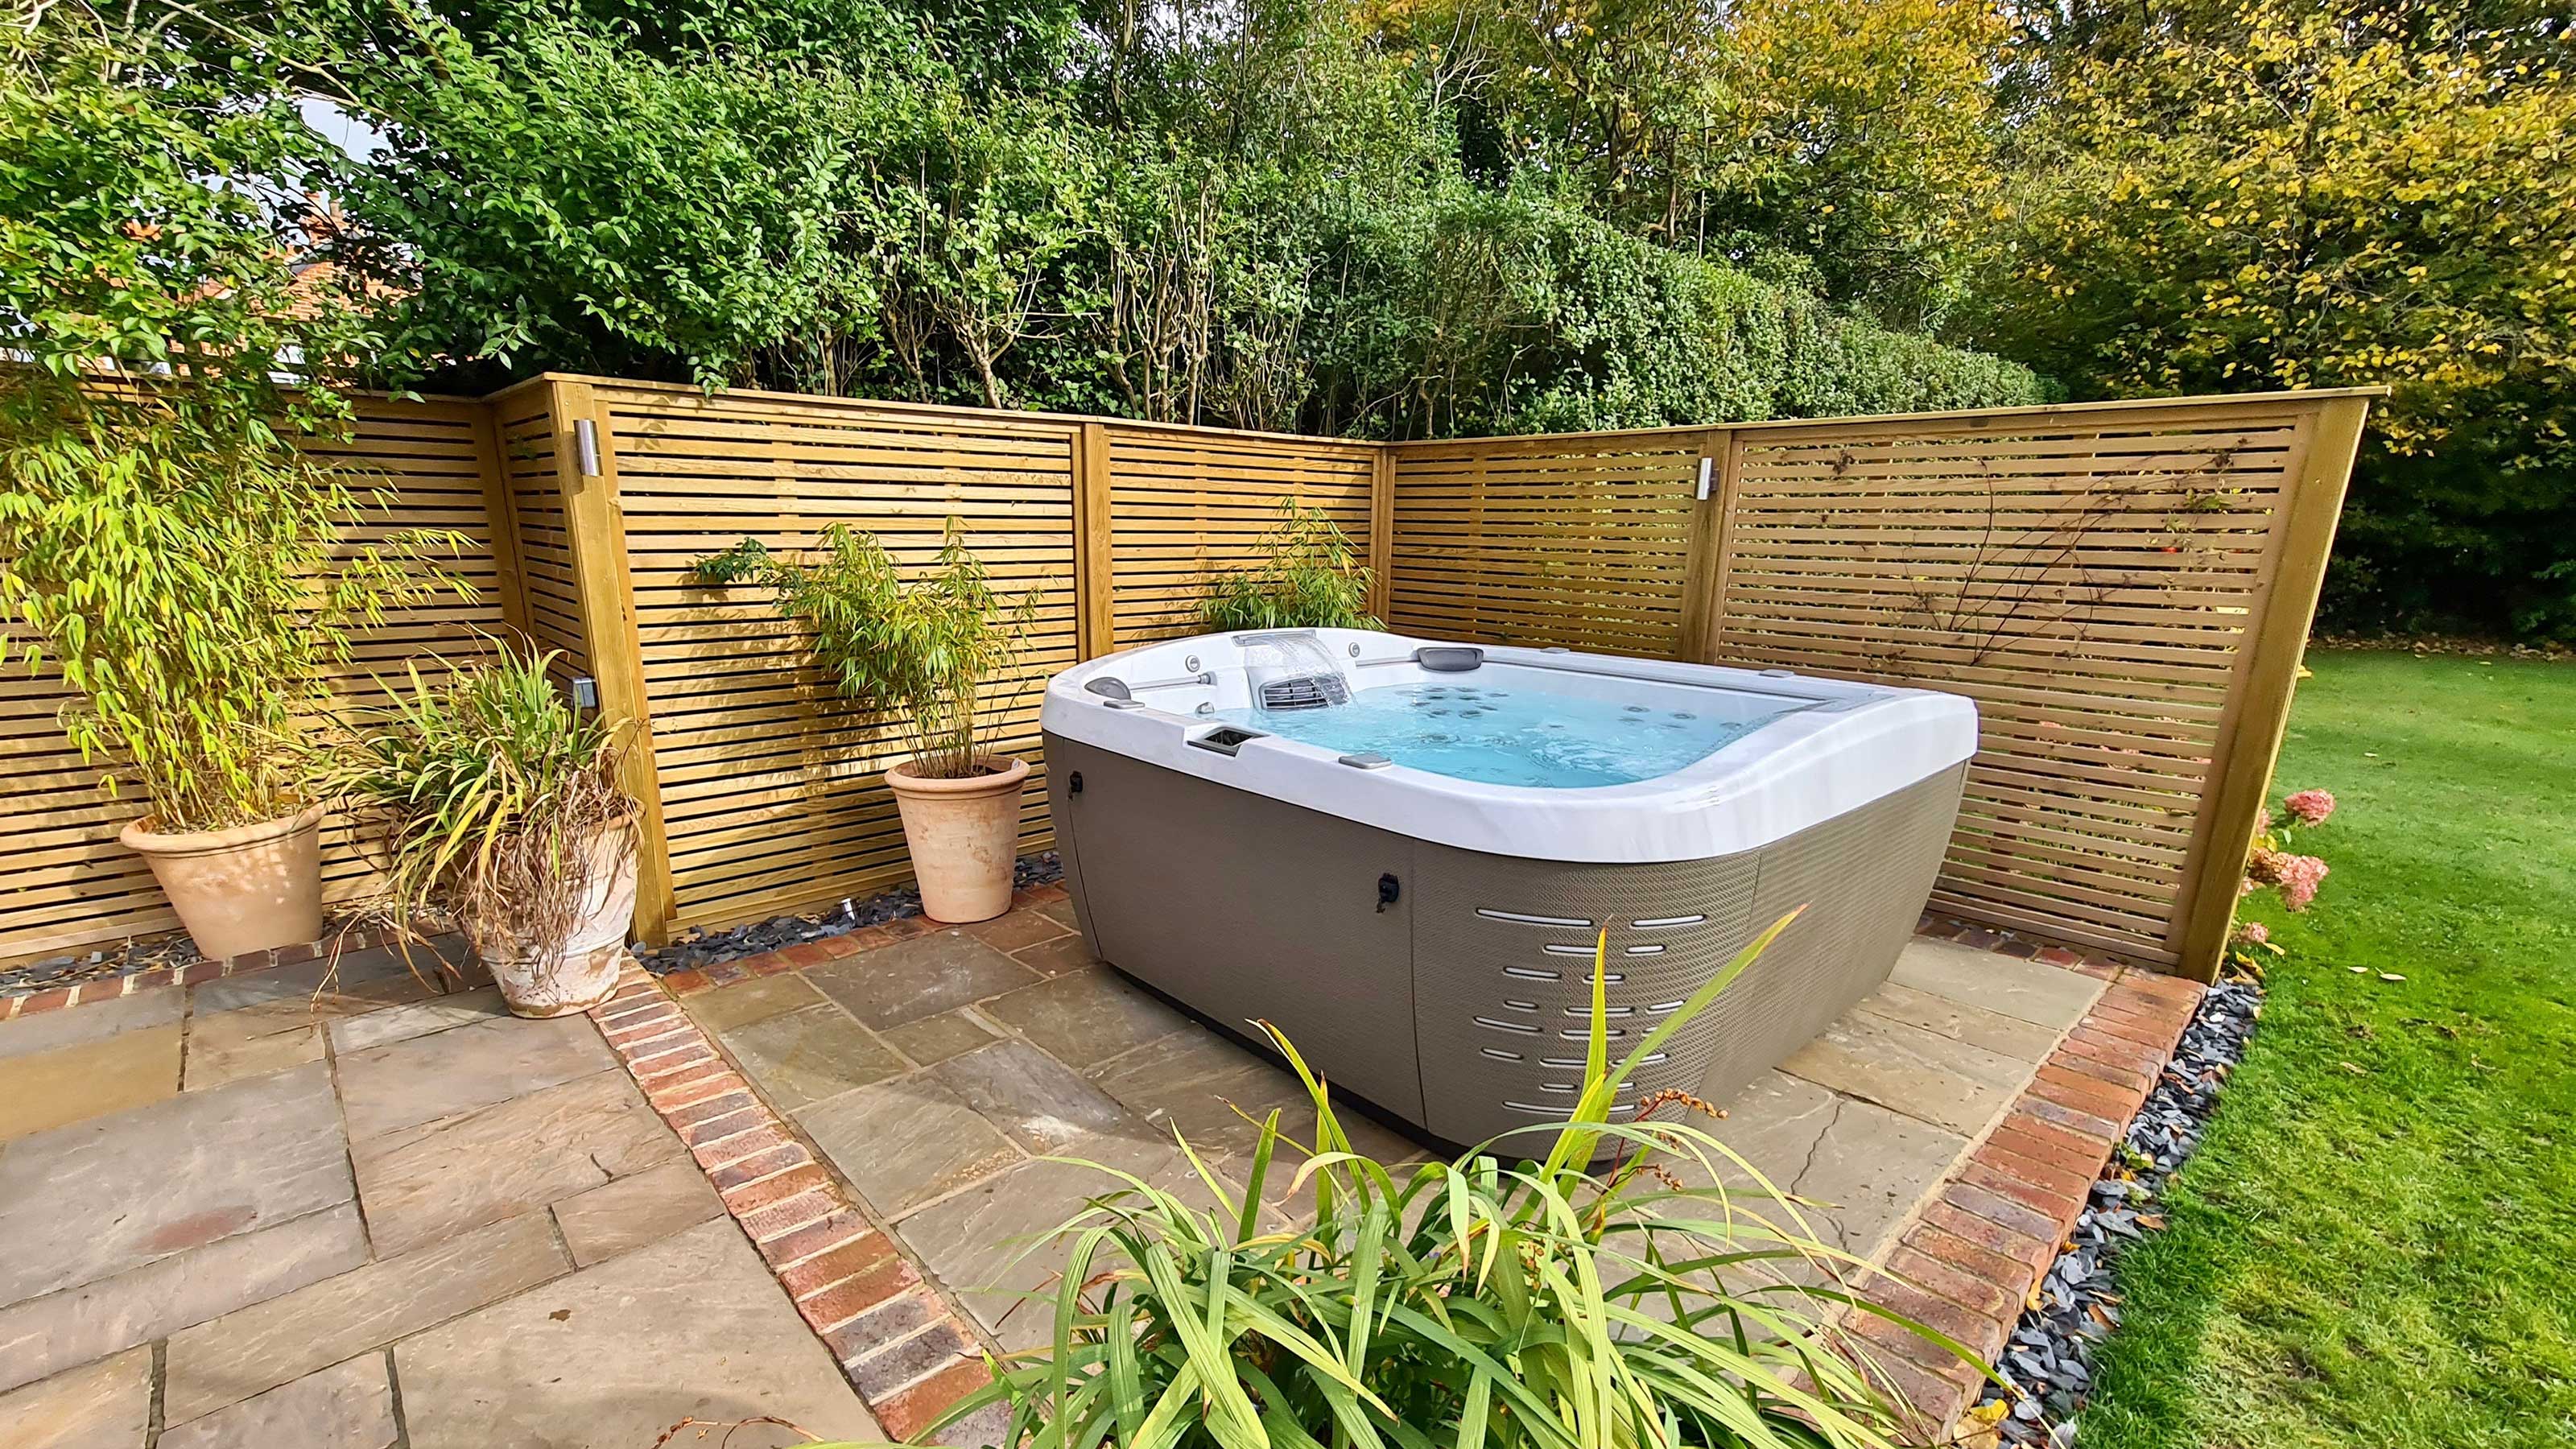 10 Solid Reasons To Avoid Backyard Hot Tub Privacy